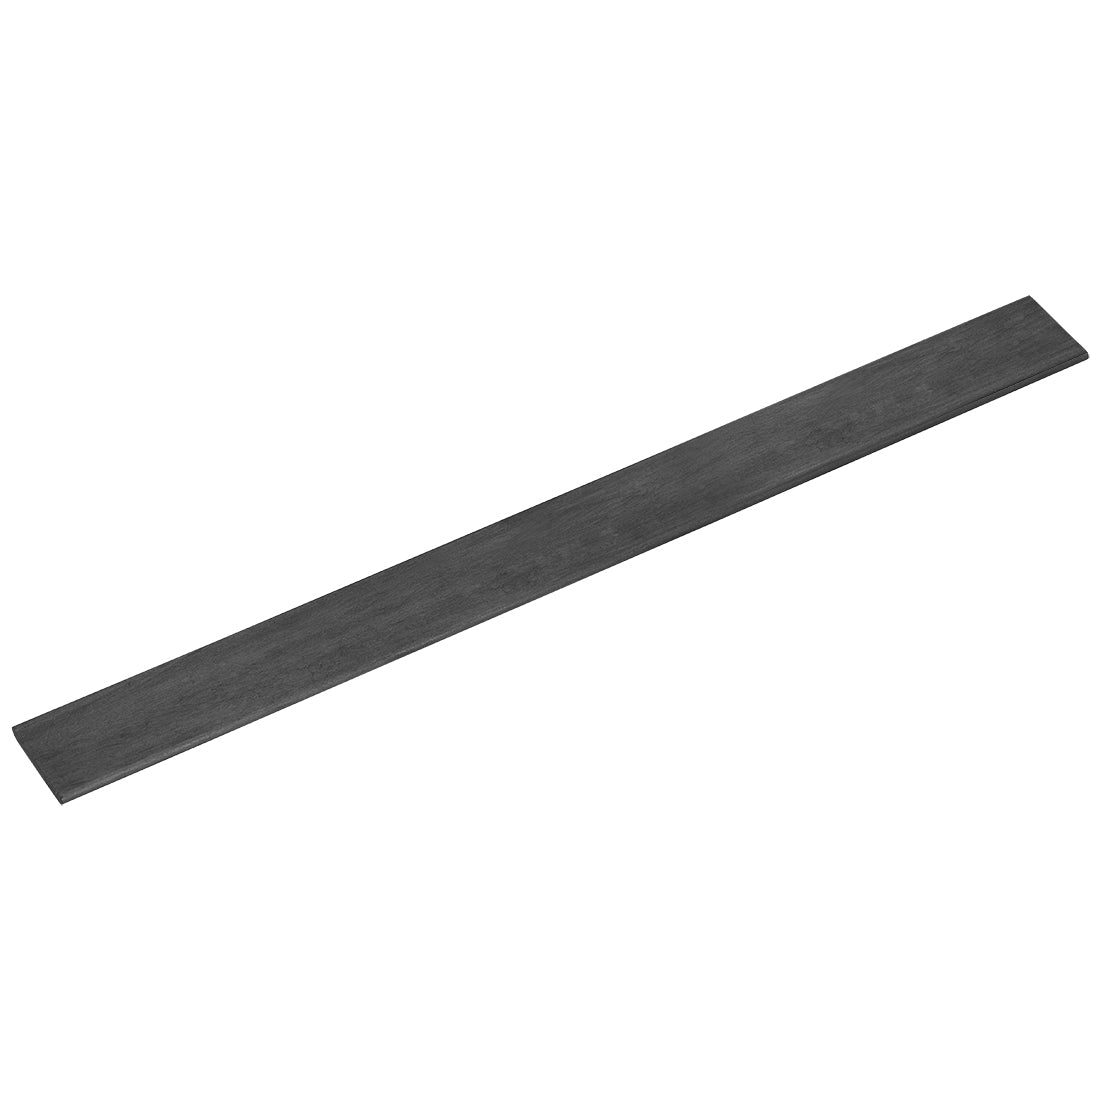 uxcell Uxcell Carbon Fiber Strip Bars 2x19mm 600mm Length Pultruded Carbon Fiber Strips for Kites, RC Airplane 1 Pcs